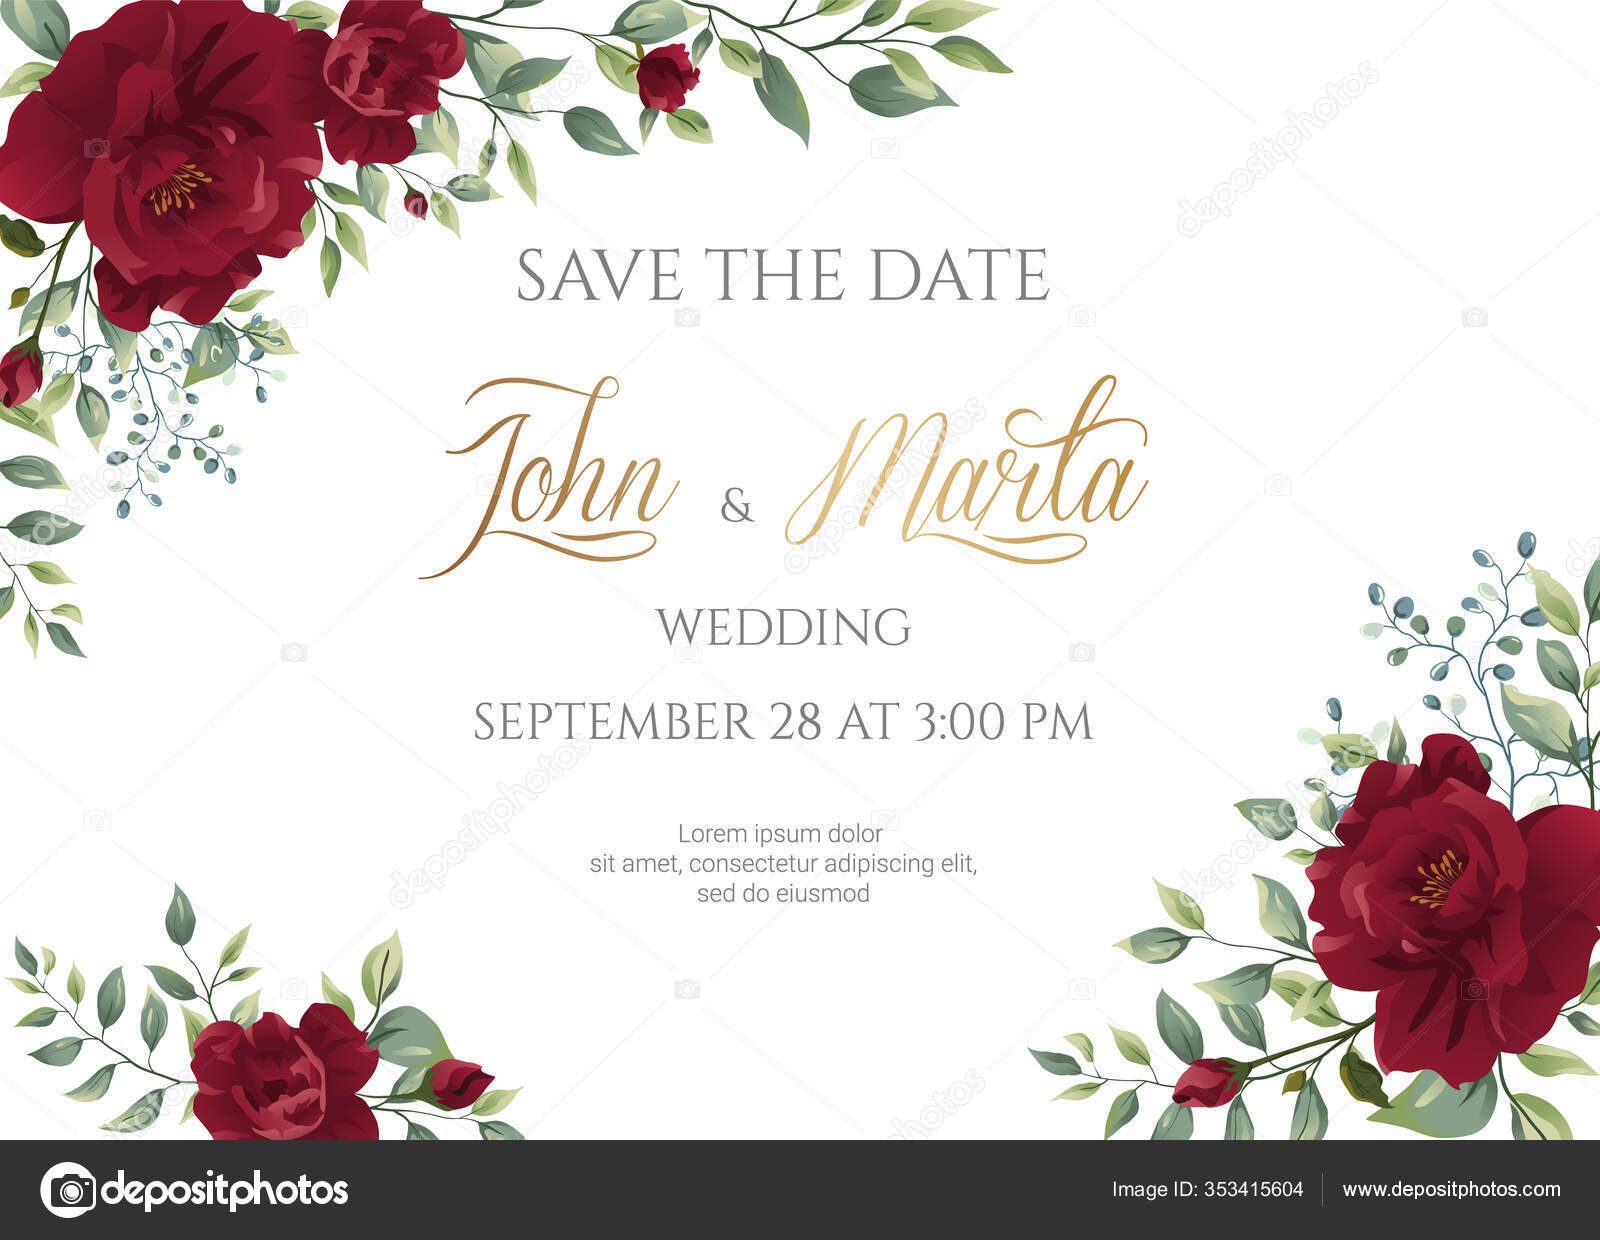 Wedding Invitation Card Red Roses Watercolor Leaves Golden Geometric Frame Stock Vector Image By C Anfisa1812 353415604